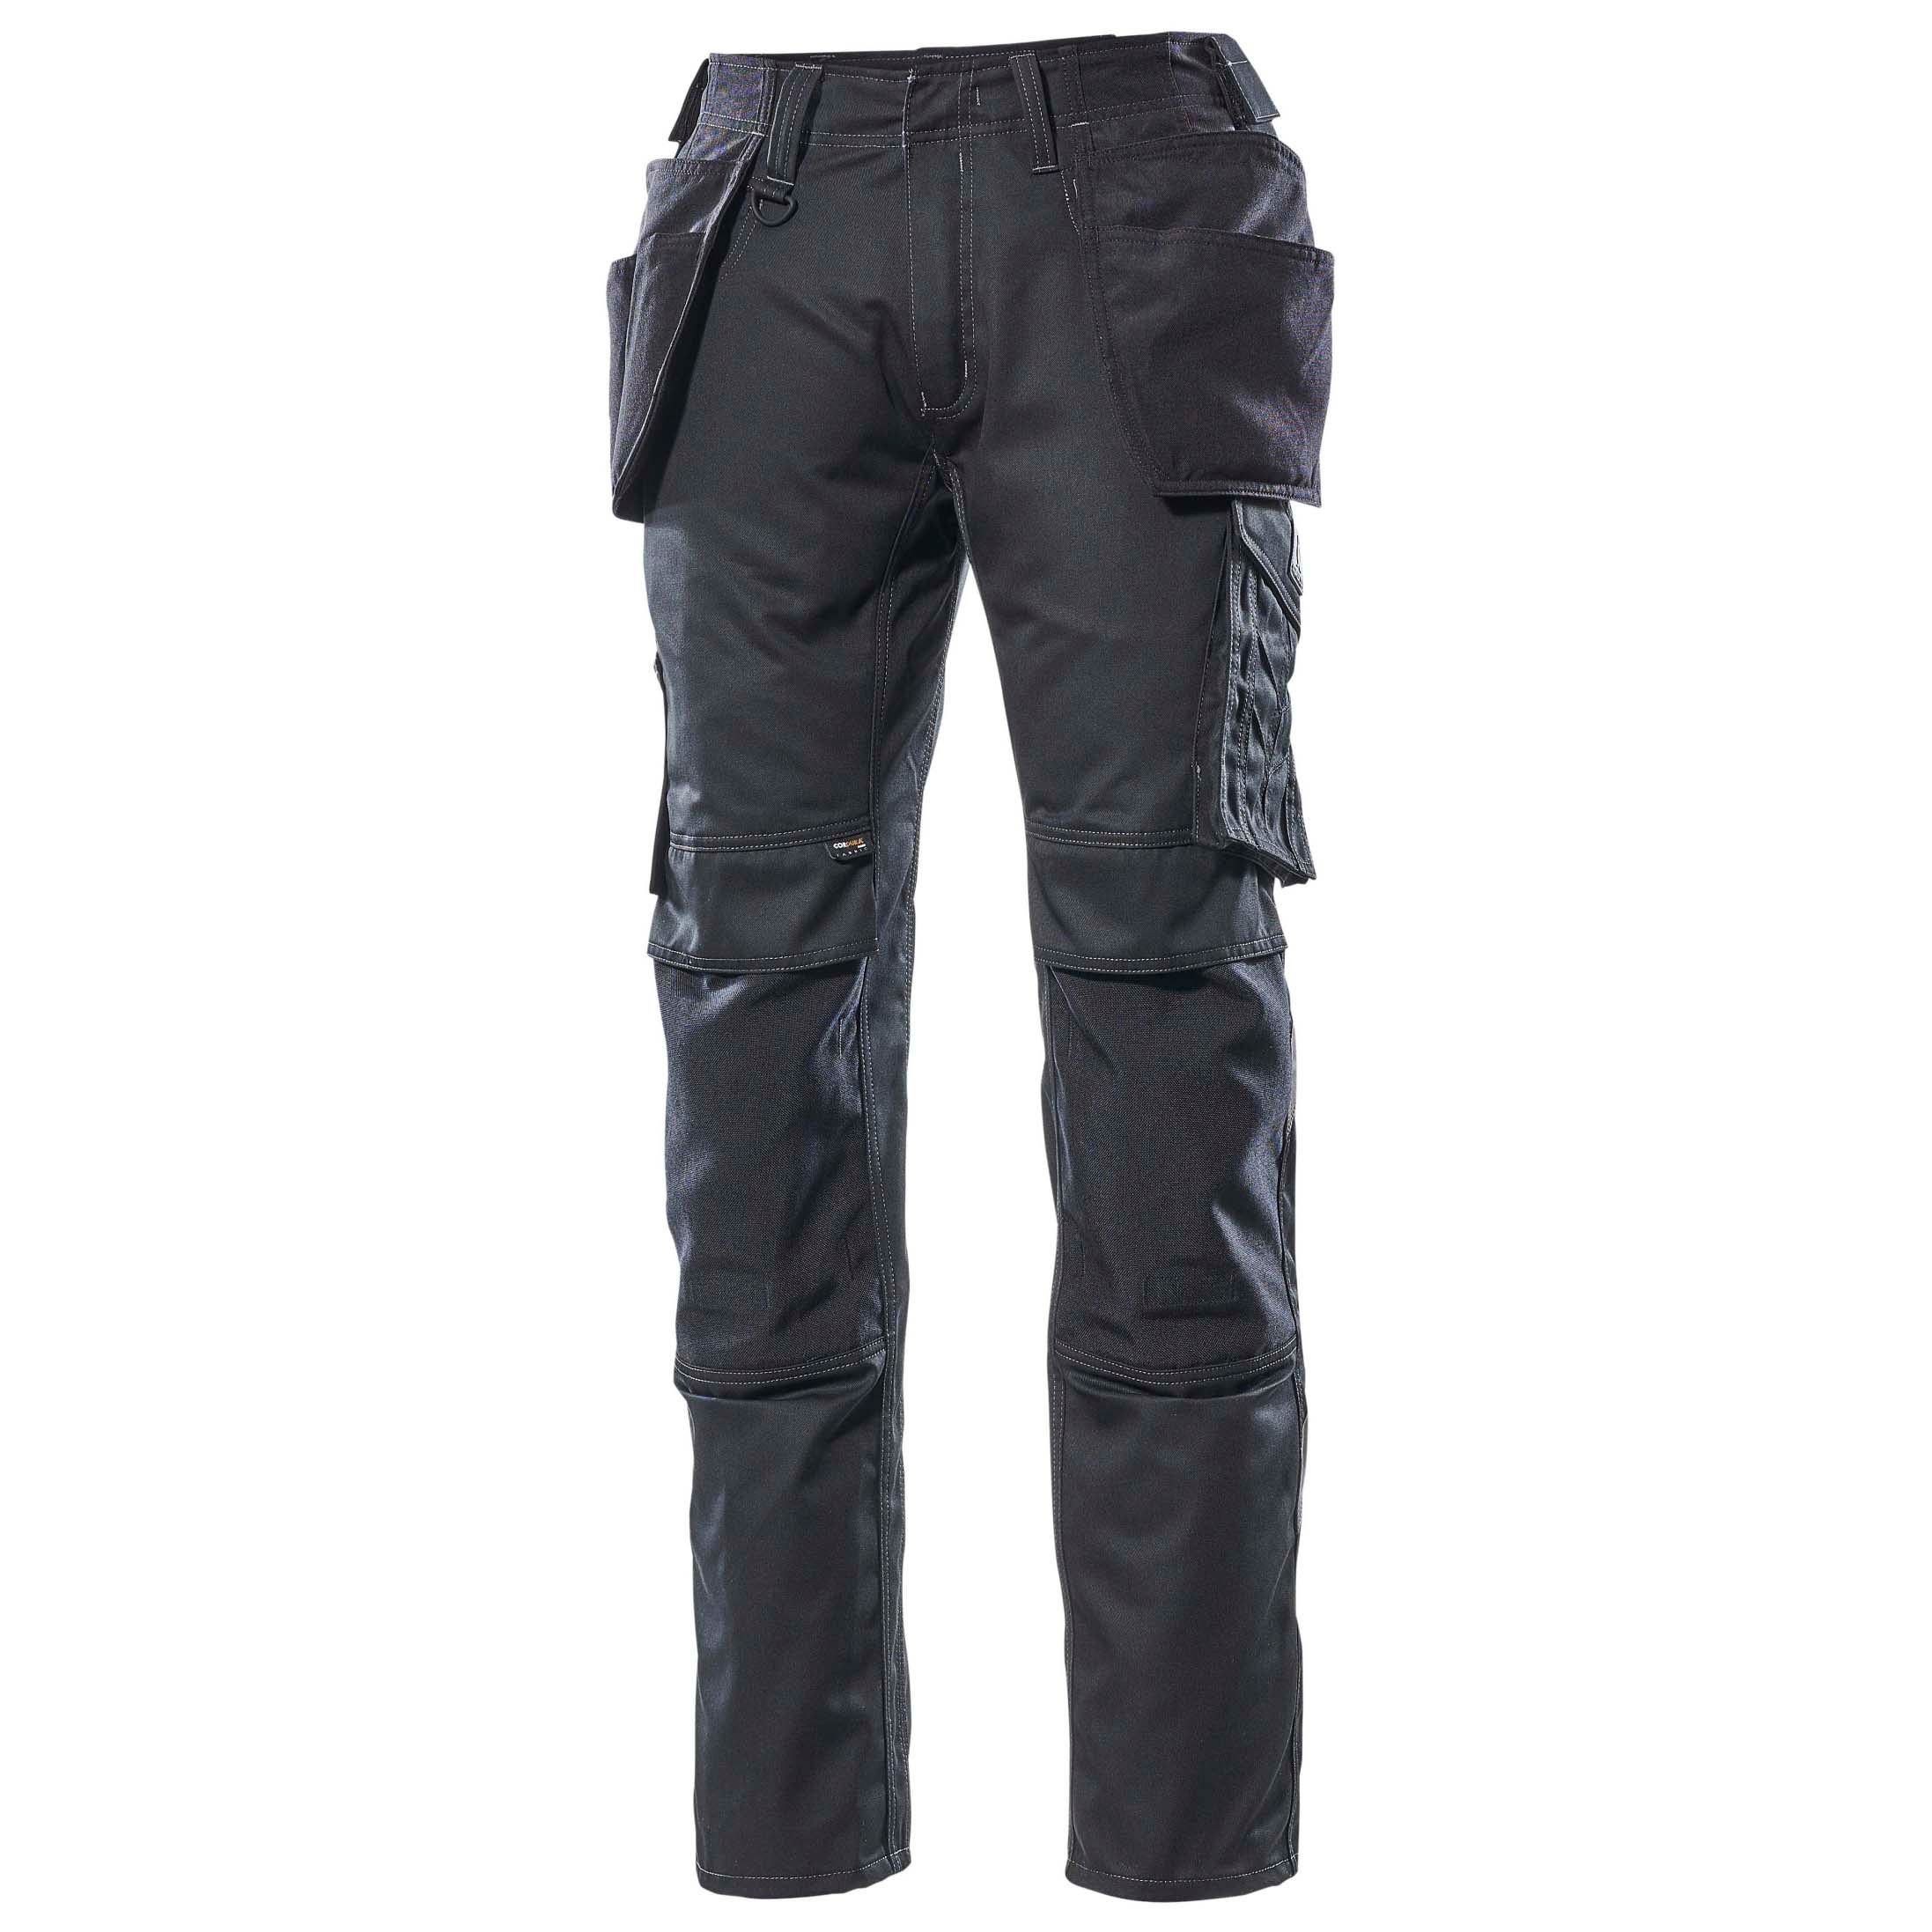 Mascot Workwear Trousers 17031  Mascot Shorts 17149 Holster Pockets  Navy   PAM Ties Limited  Basement Waterproofing And Damp Proofing